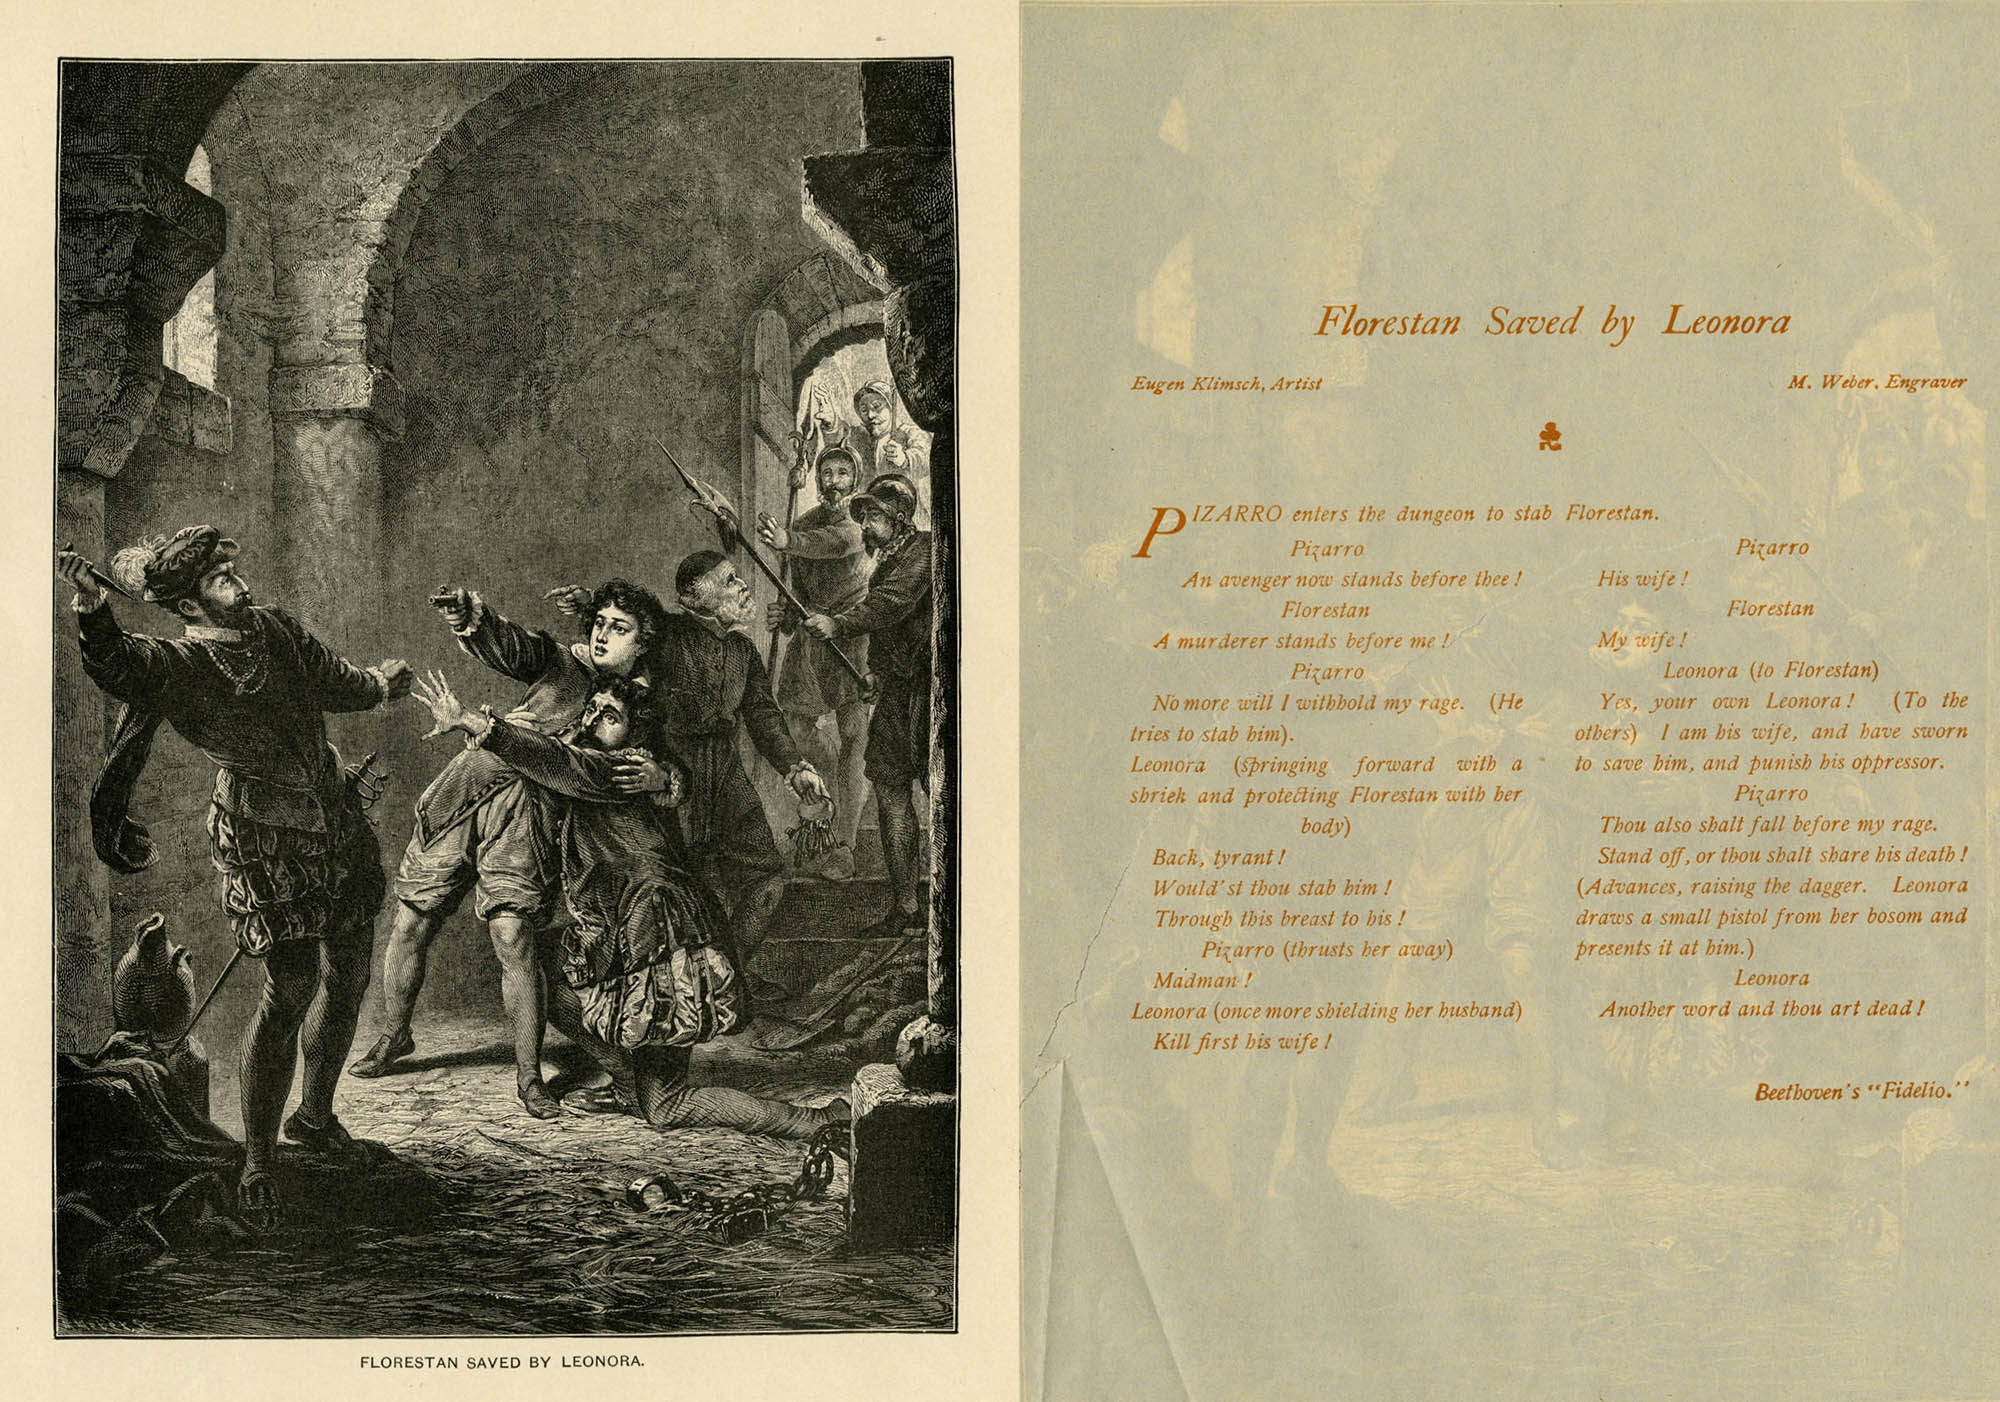 (left) Don Pizarro, with his knife drawn, is approaching Florestan. Fidelio (aka Leonora in disguise) is shielding Florestan, her pistol drawn and aimed at Don Pizarro. Soldiers are bursting through the door behind Florestan and Leonora. (right) The text to the scene in Fidelio in which Leonora reveals herself to be Florestan’s wife. 